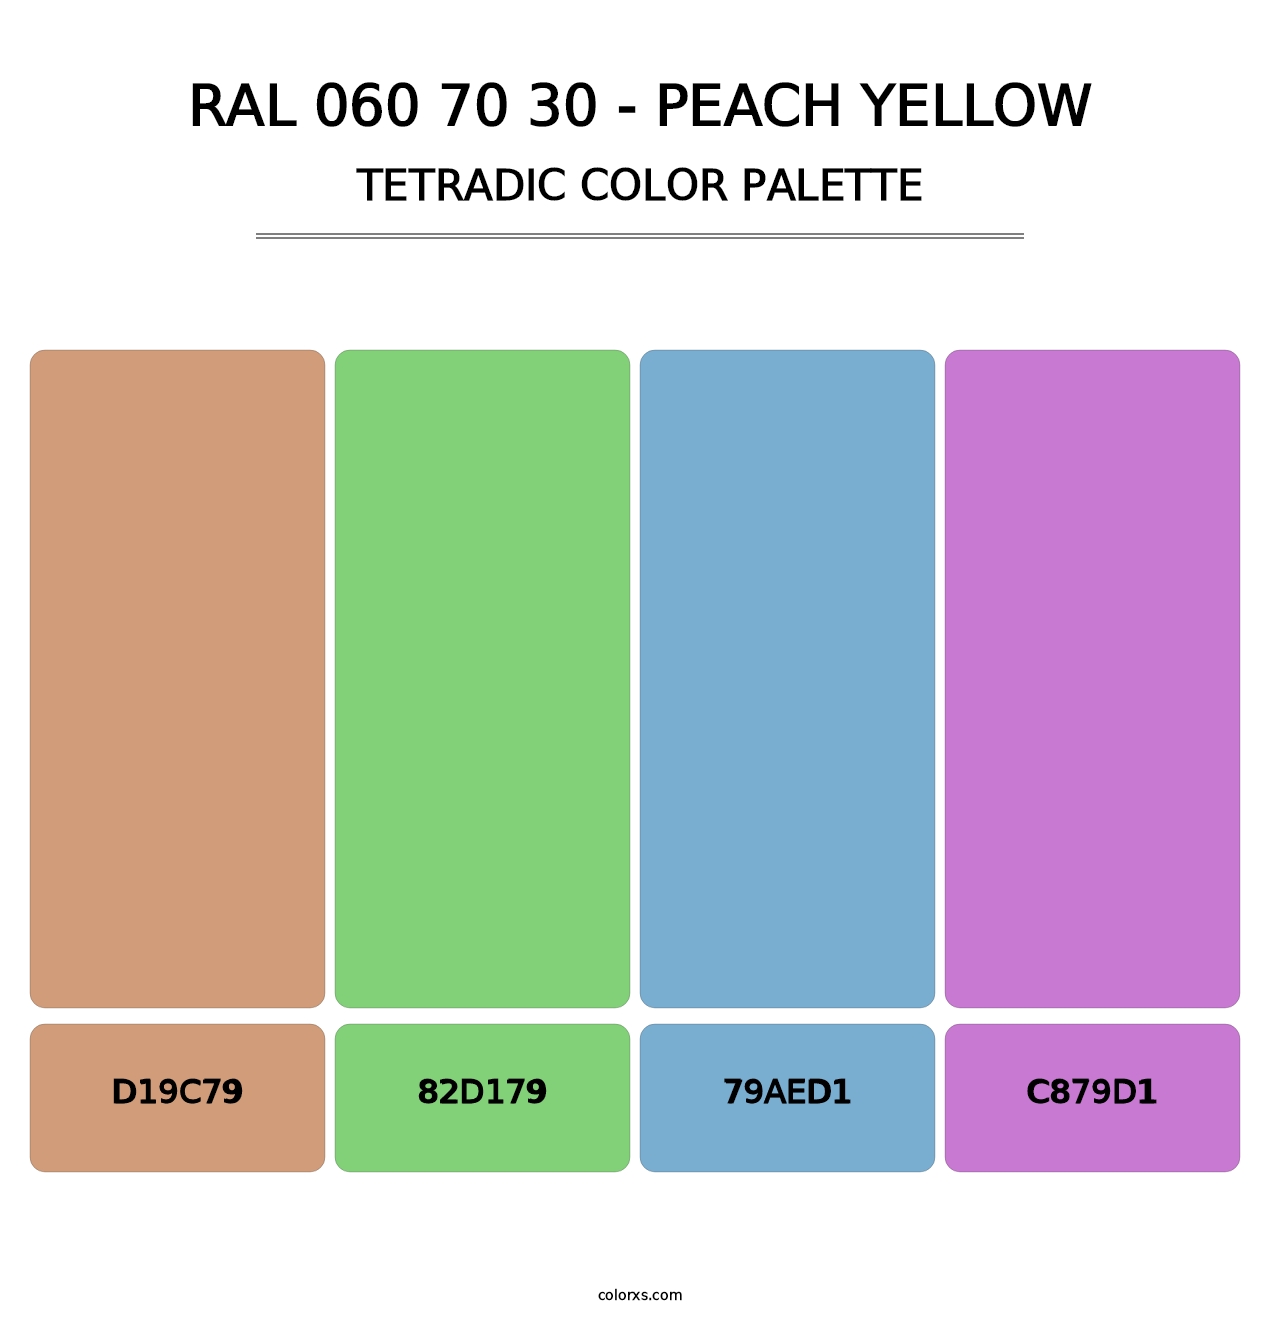 RAL 060 70 30 - Peach Yellow - Tetradic Color Palette